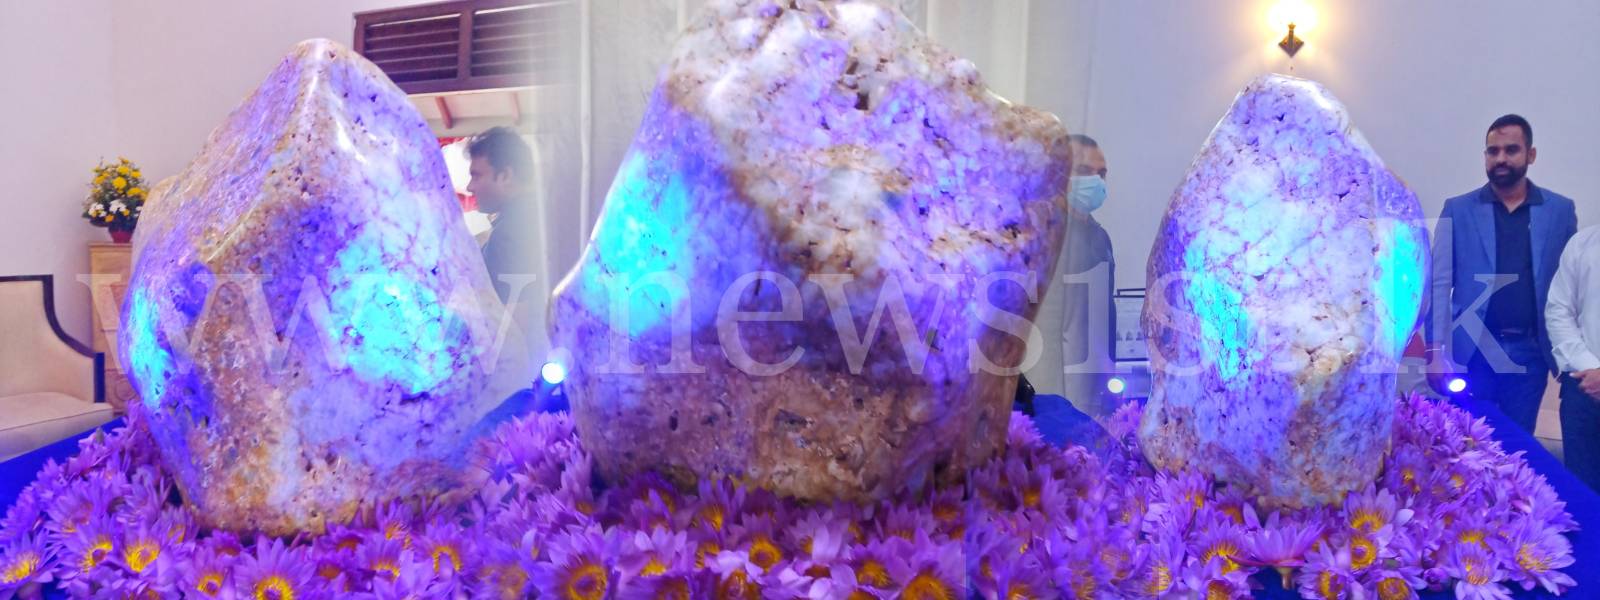 World's largest Blue Sapphire discovered in SL